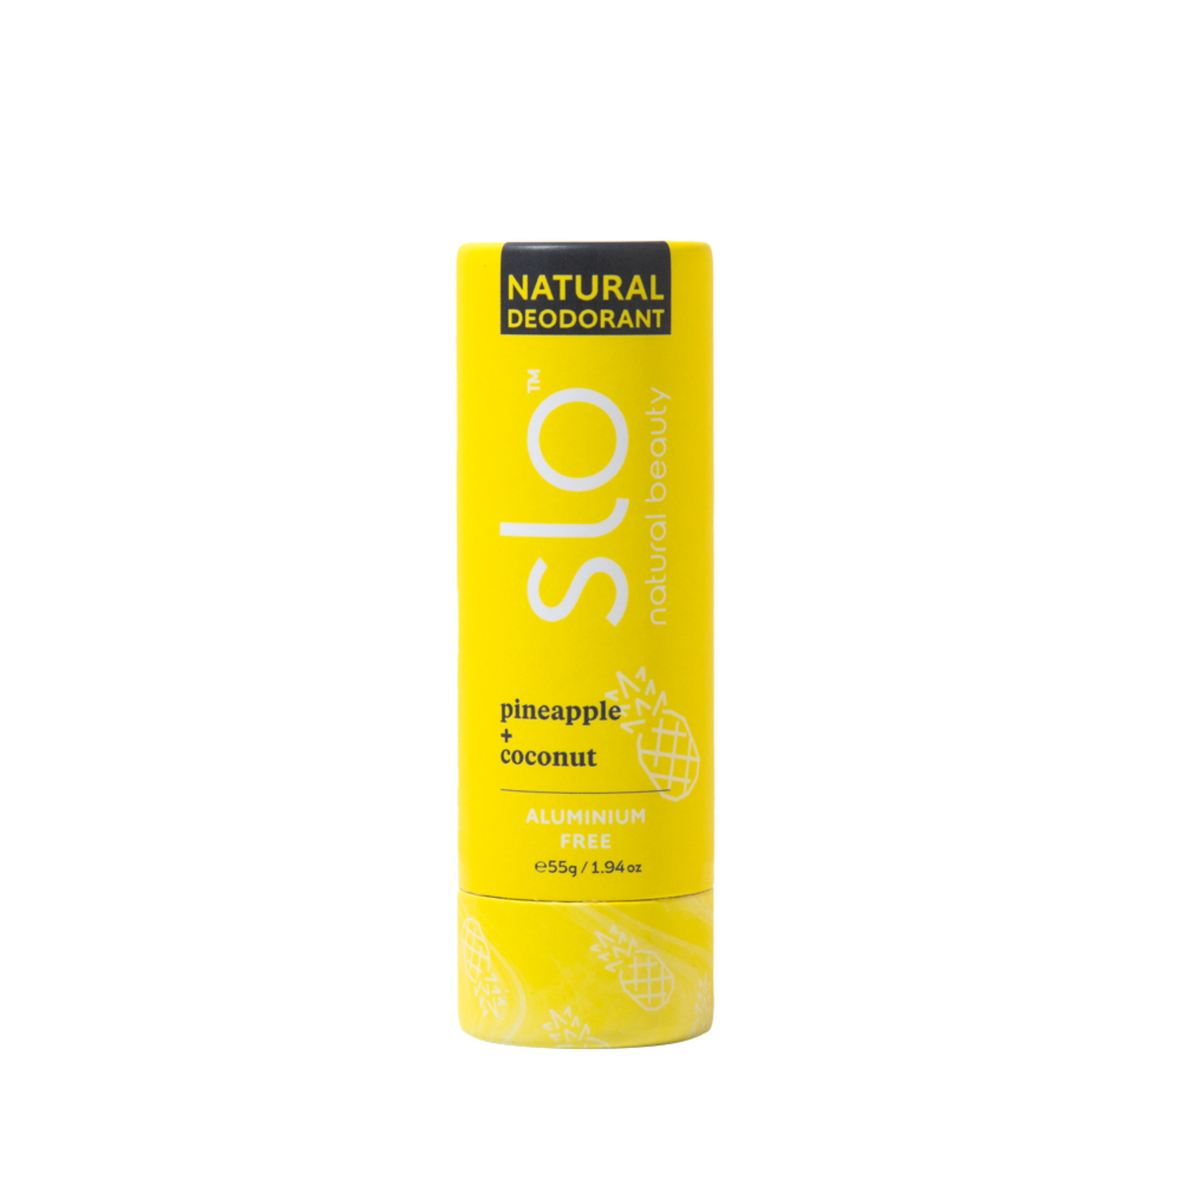 Slo Natural Deodorant - Pineapple and Coconut